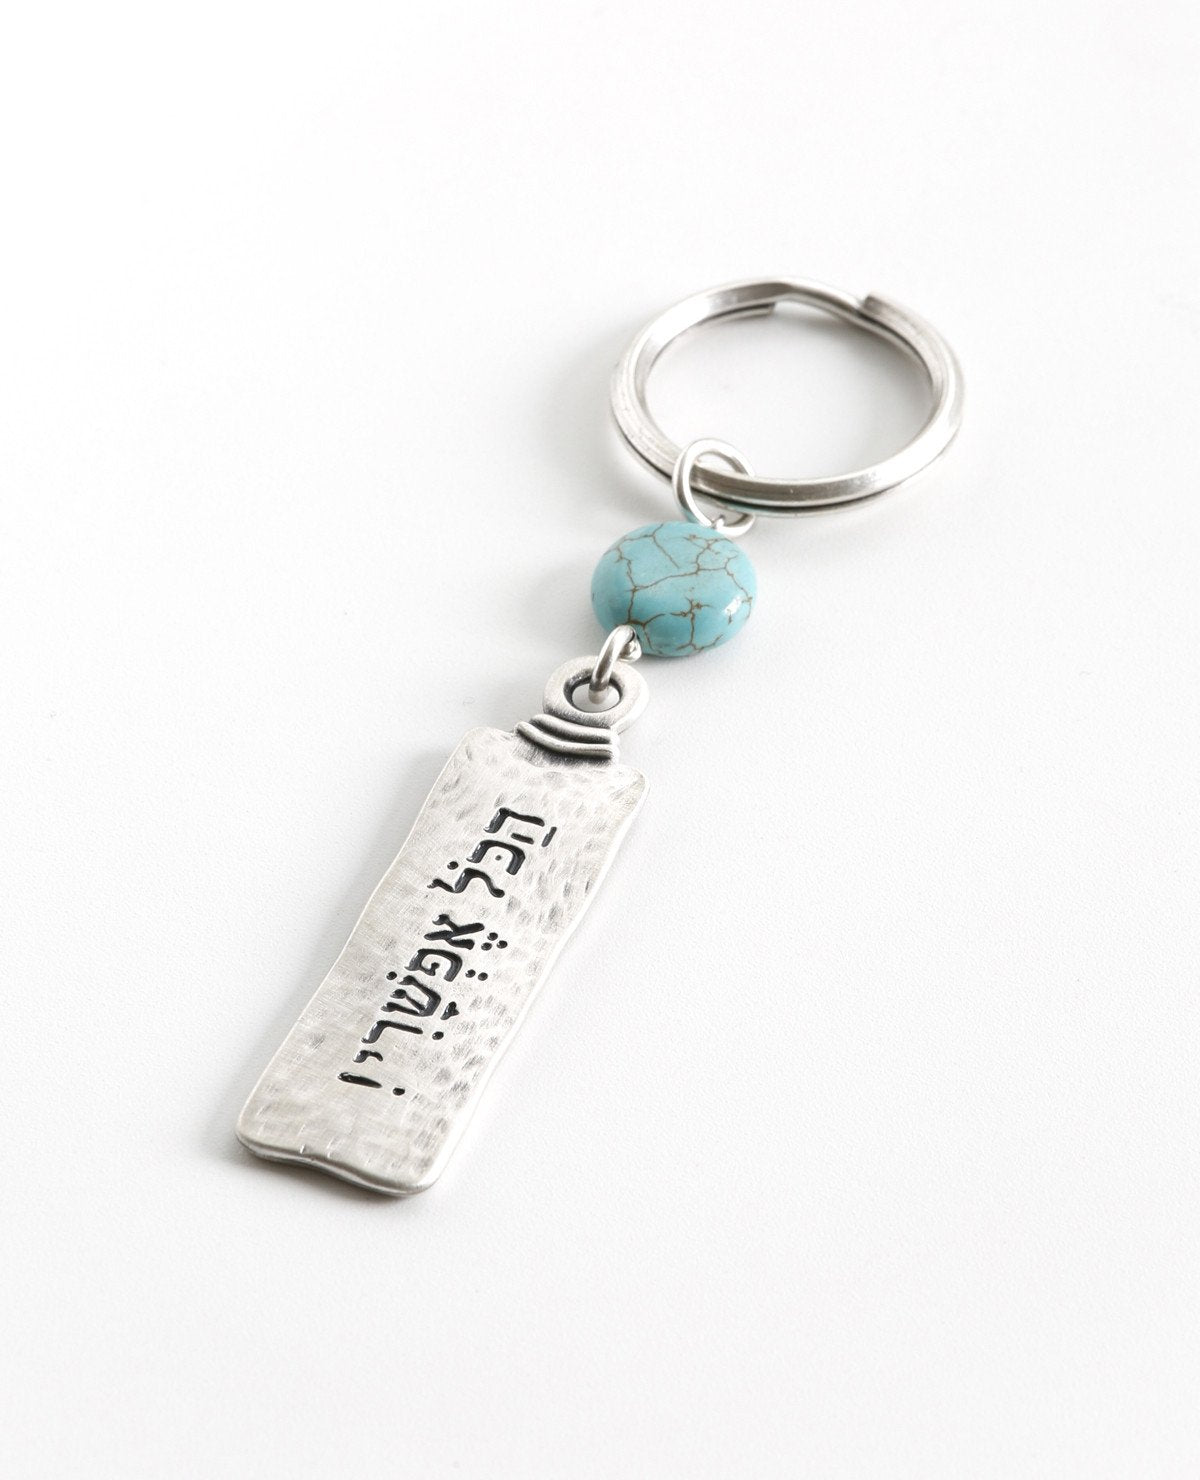 A classically designed keychain - for him or for her. Shaped like an elongated rectangle with the words "Everything is Possible!". Written on the other side are empowering words of hope and inspiration. A rounded turquoise bead at the top of the keychain completes the classic look. The keychain is coated in sterling silver and is strong and reliable. A gift that is always appropriate to give to a special person, in any opportunity, to remind that when you want something and believe - everything is possible!